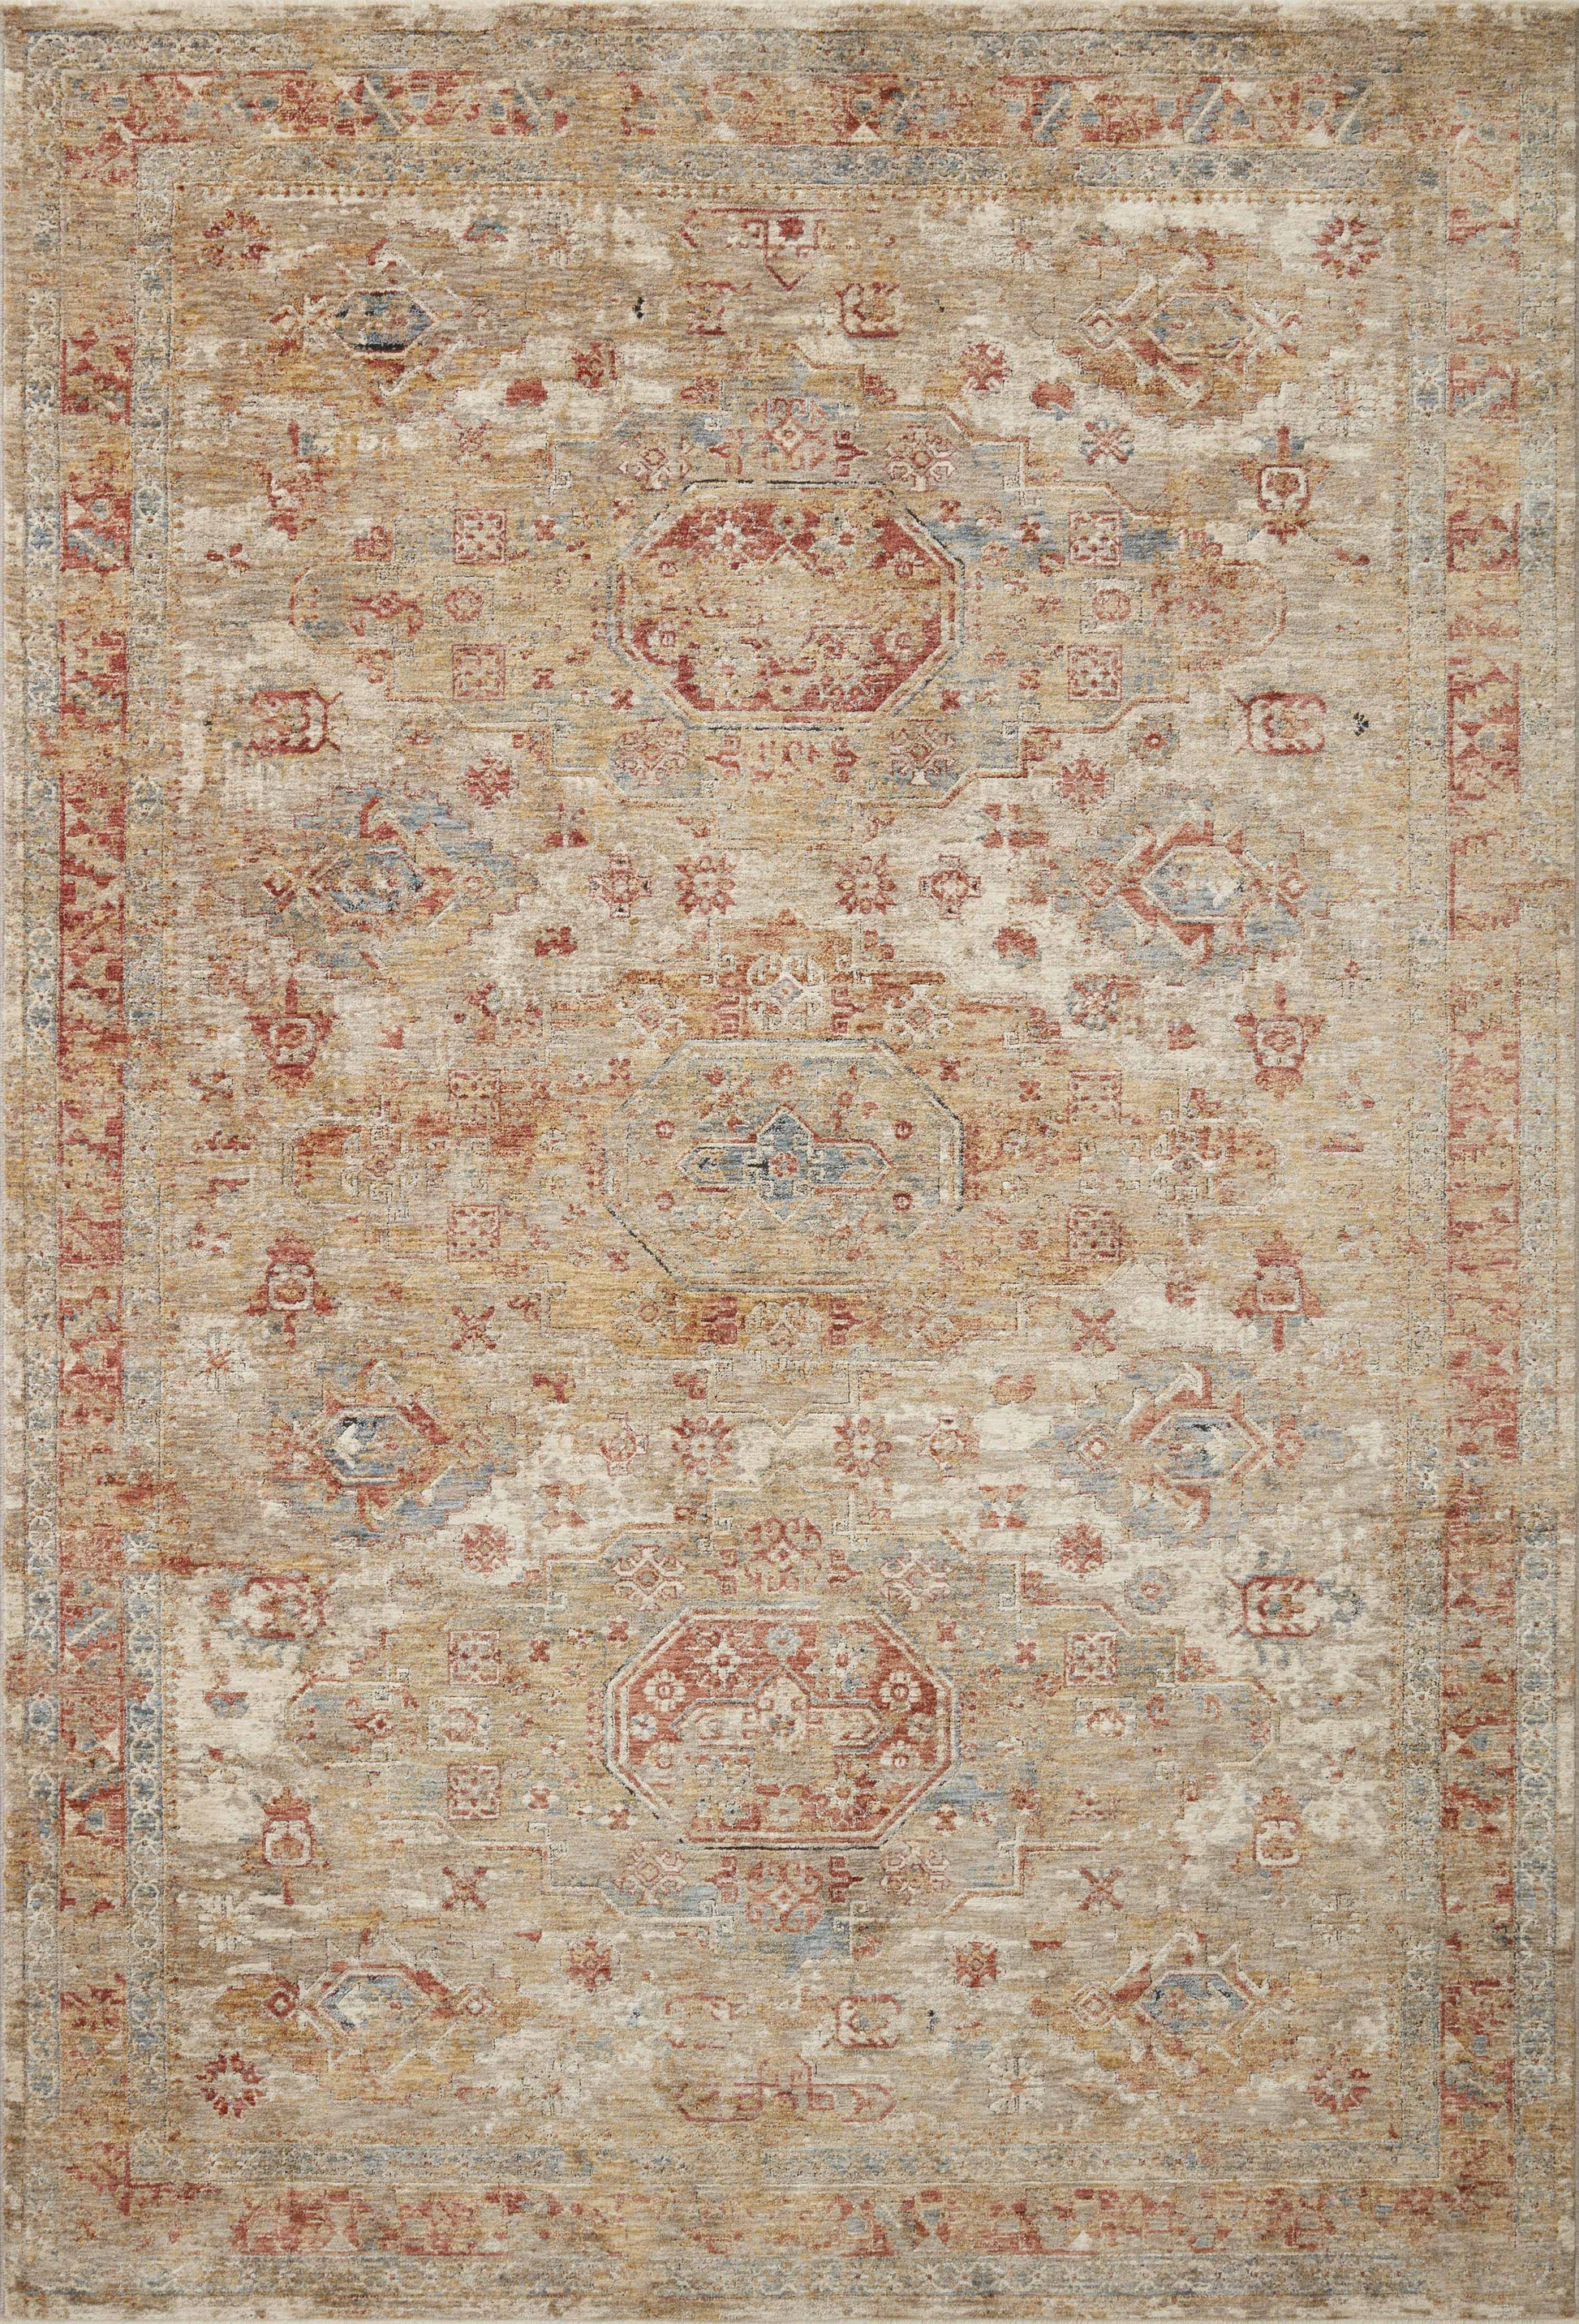 A picture of Loloi's Gaia rug, in style GAA-02, color Gold / Taupe